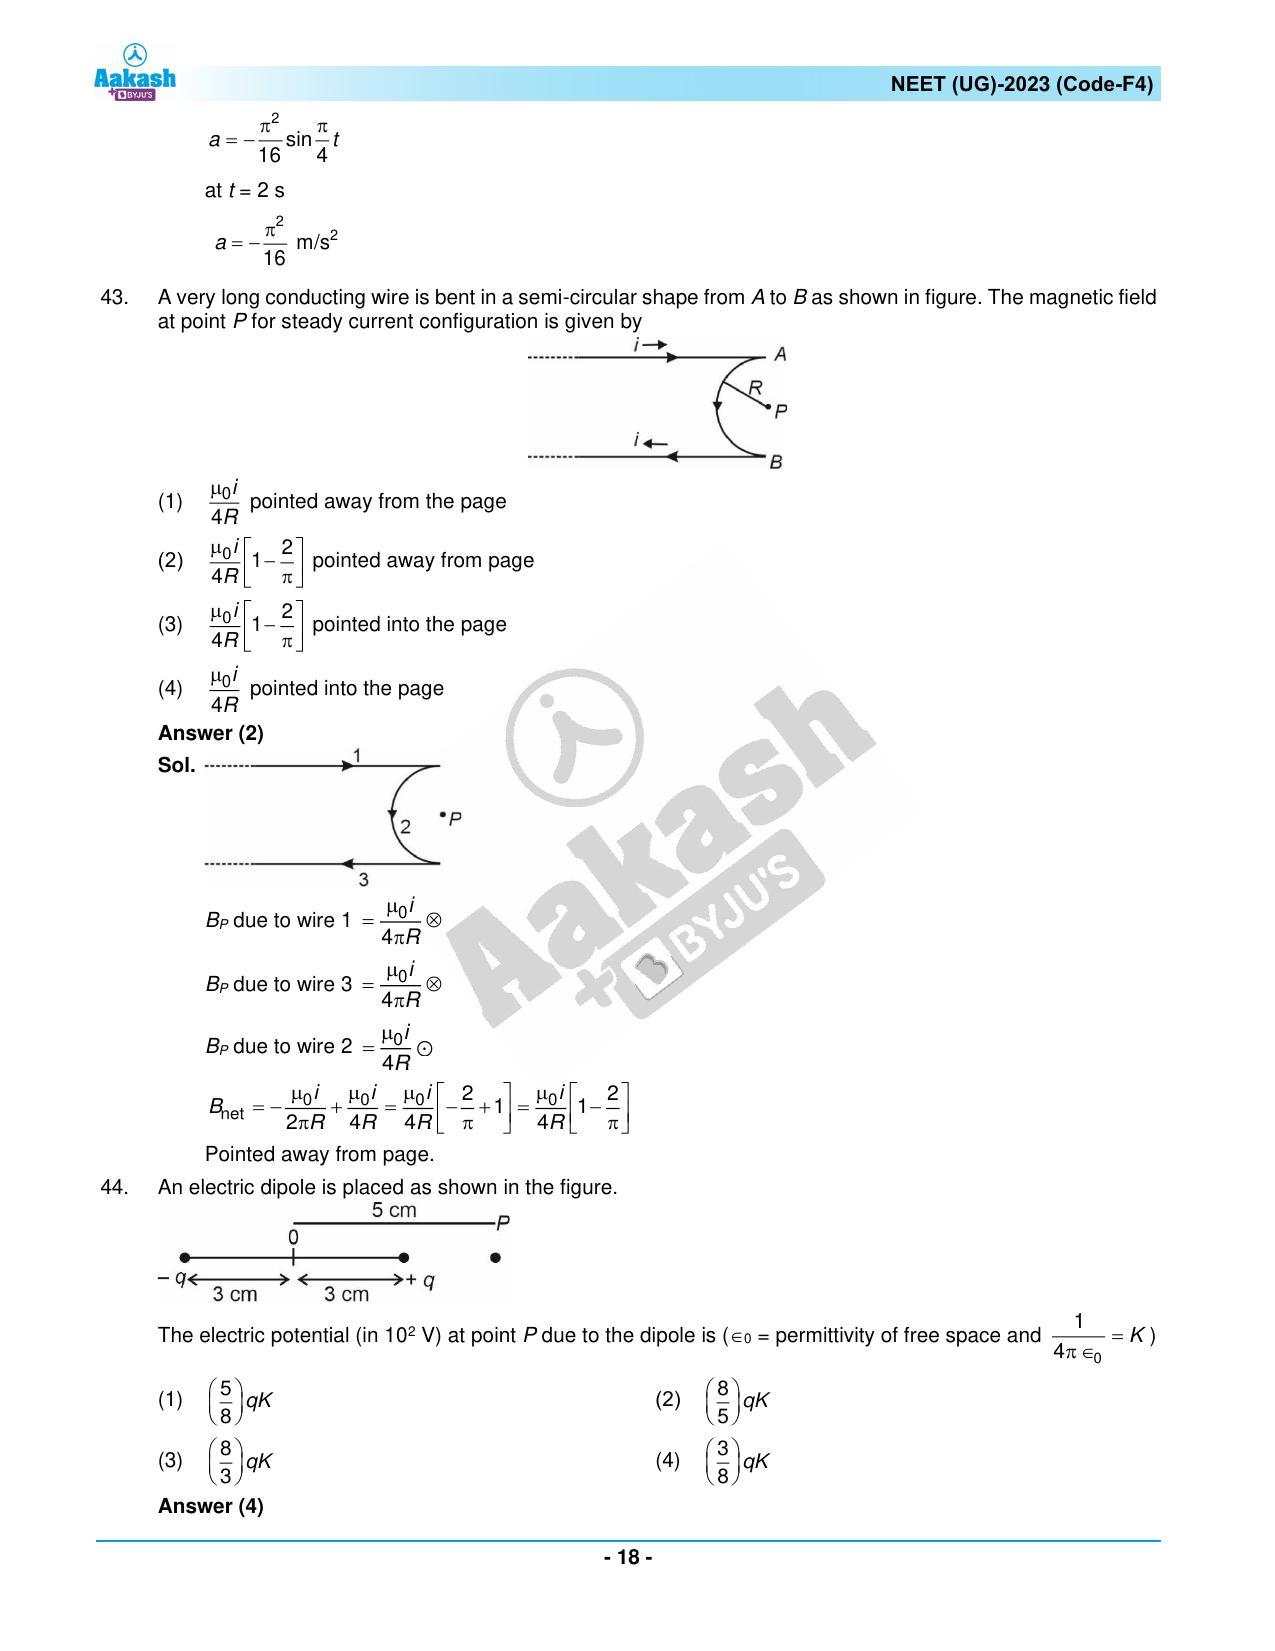 NEET 2023 Question Paper F4 - Page 18